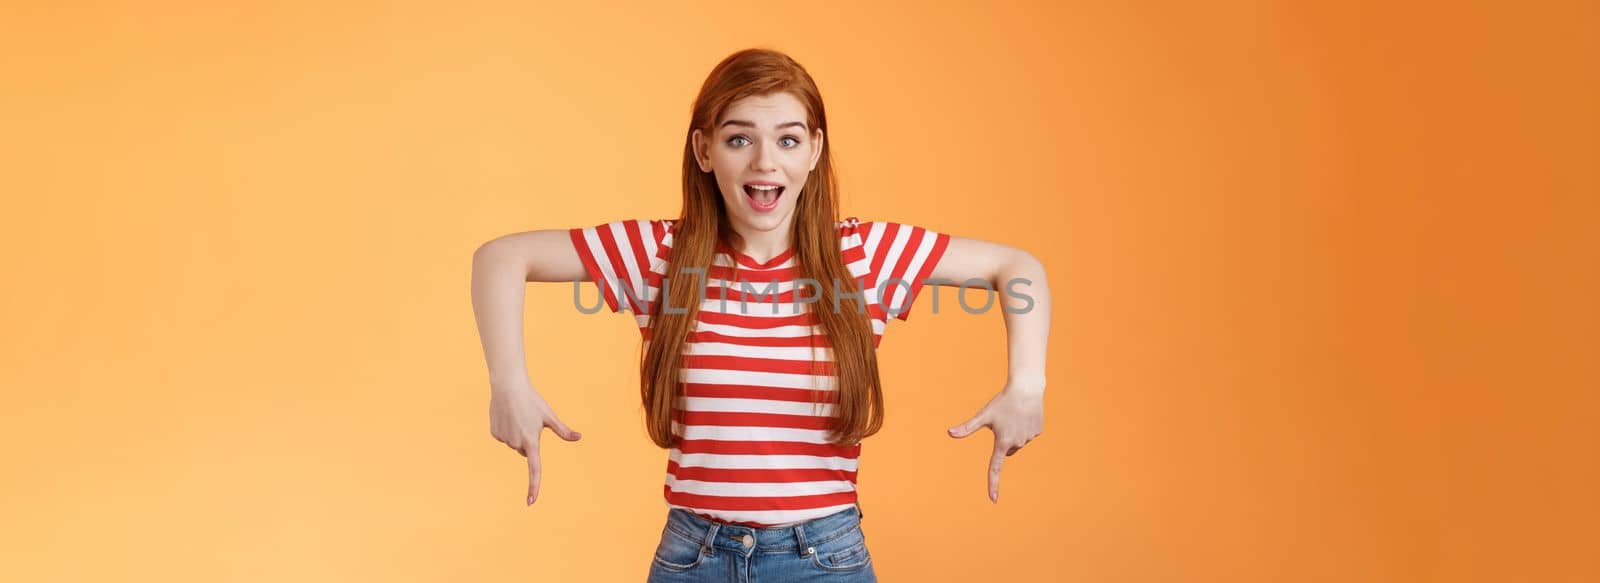 Enthusiastic lively cute redhead woman introduce incredible offer, pointing down, bottom copy space, smiling amazed, look camera, explain you awesome opportunity, feel excitement, orange background.